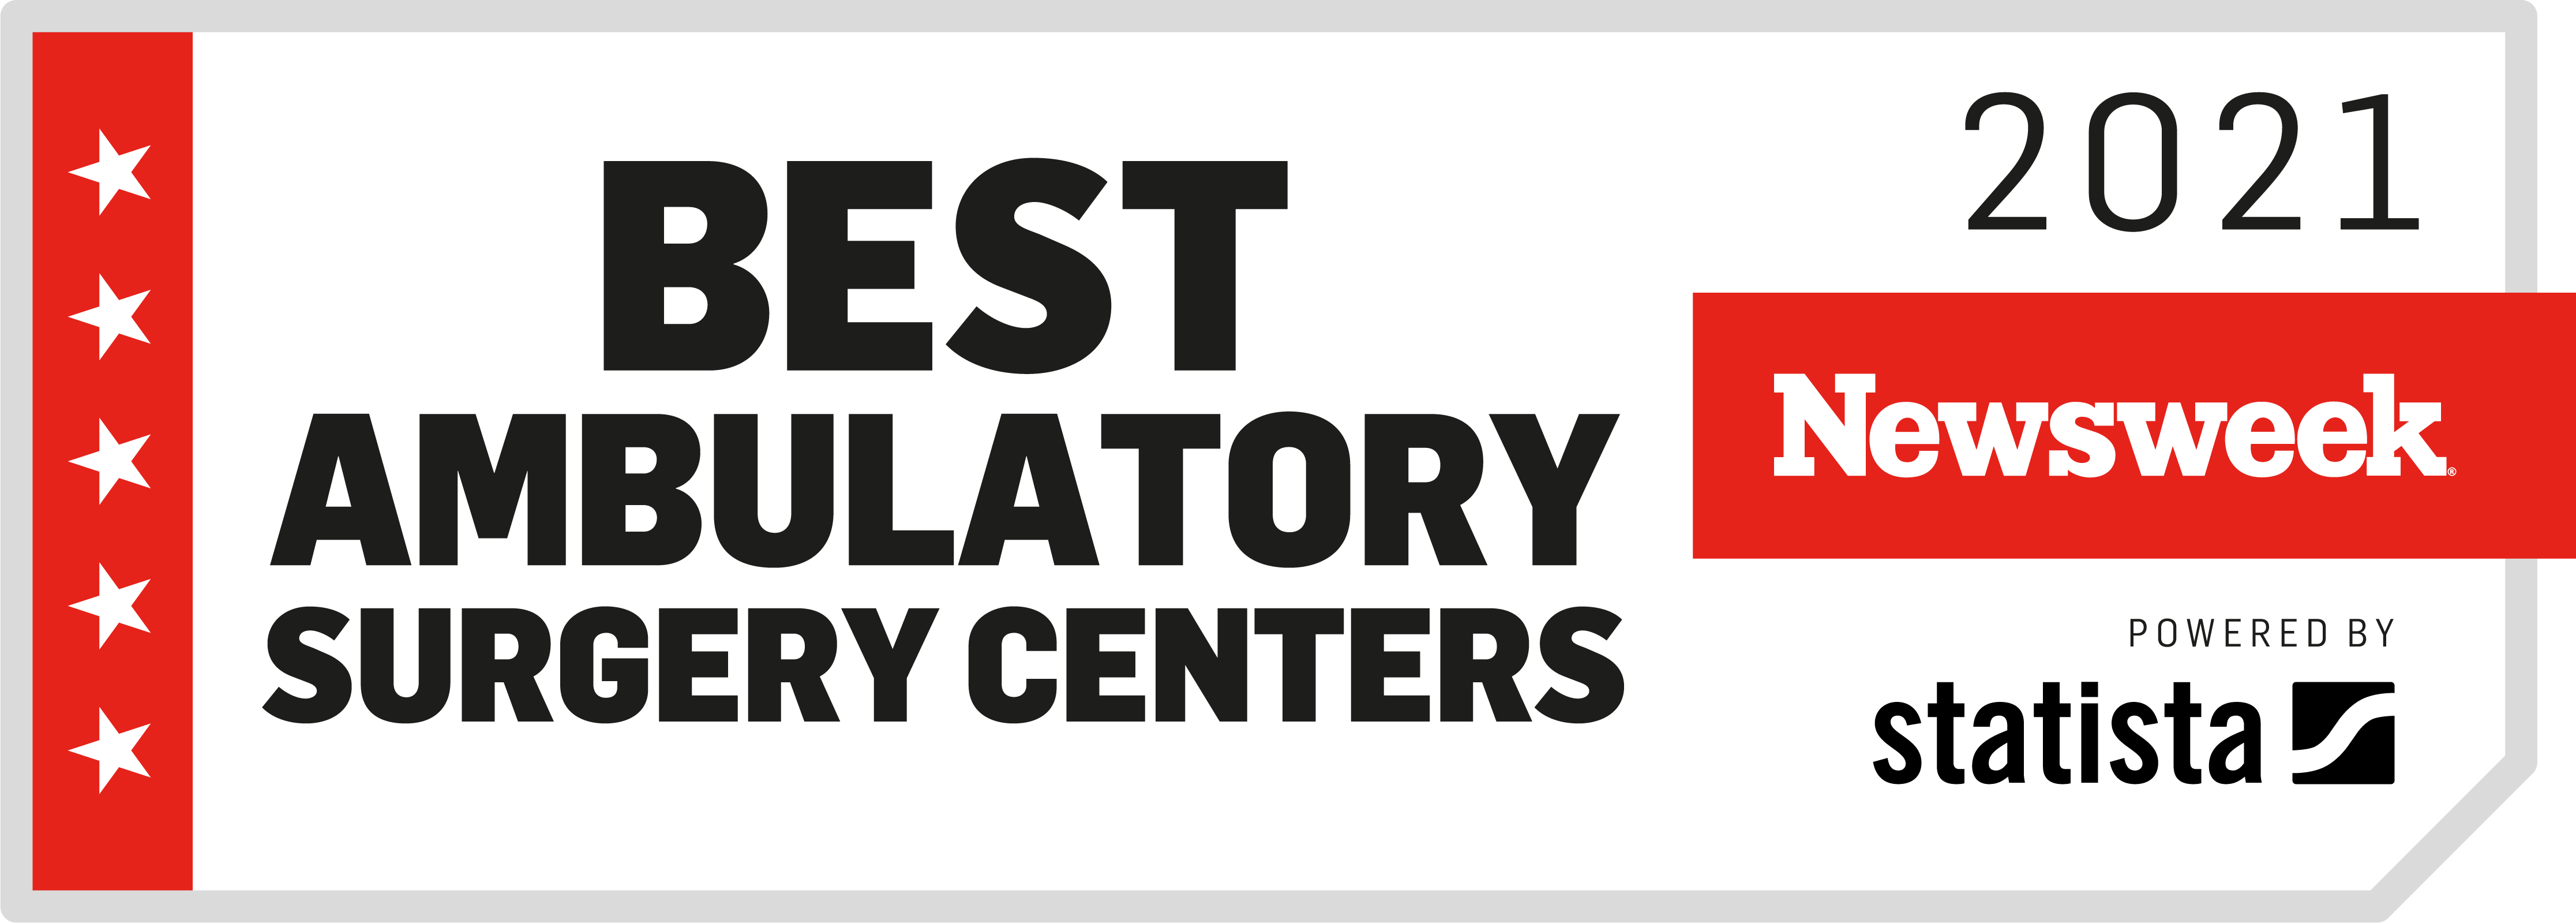 newsweek awards digestive healthcare of georgia one of the best ambulatory surgery centers 2021